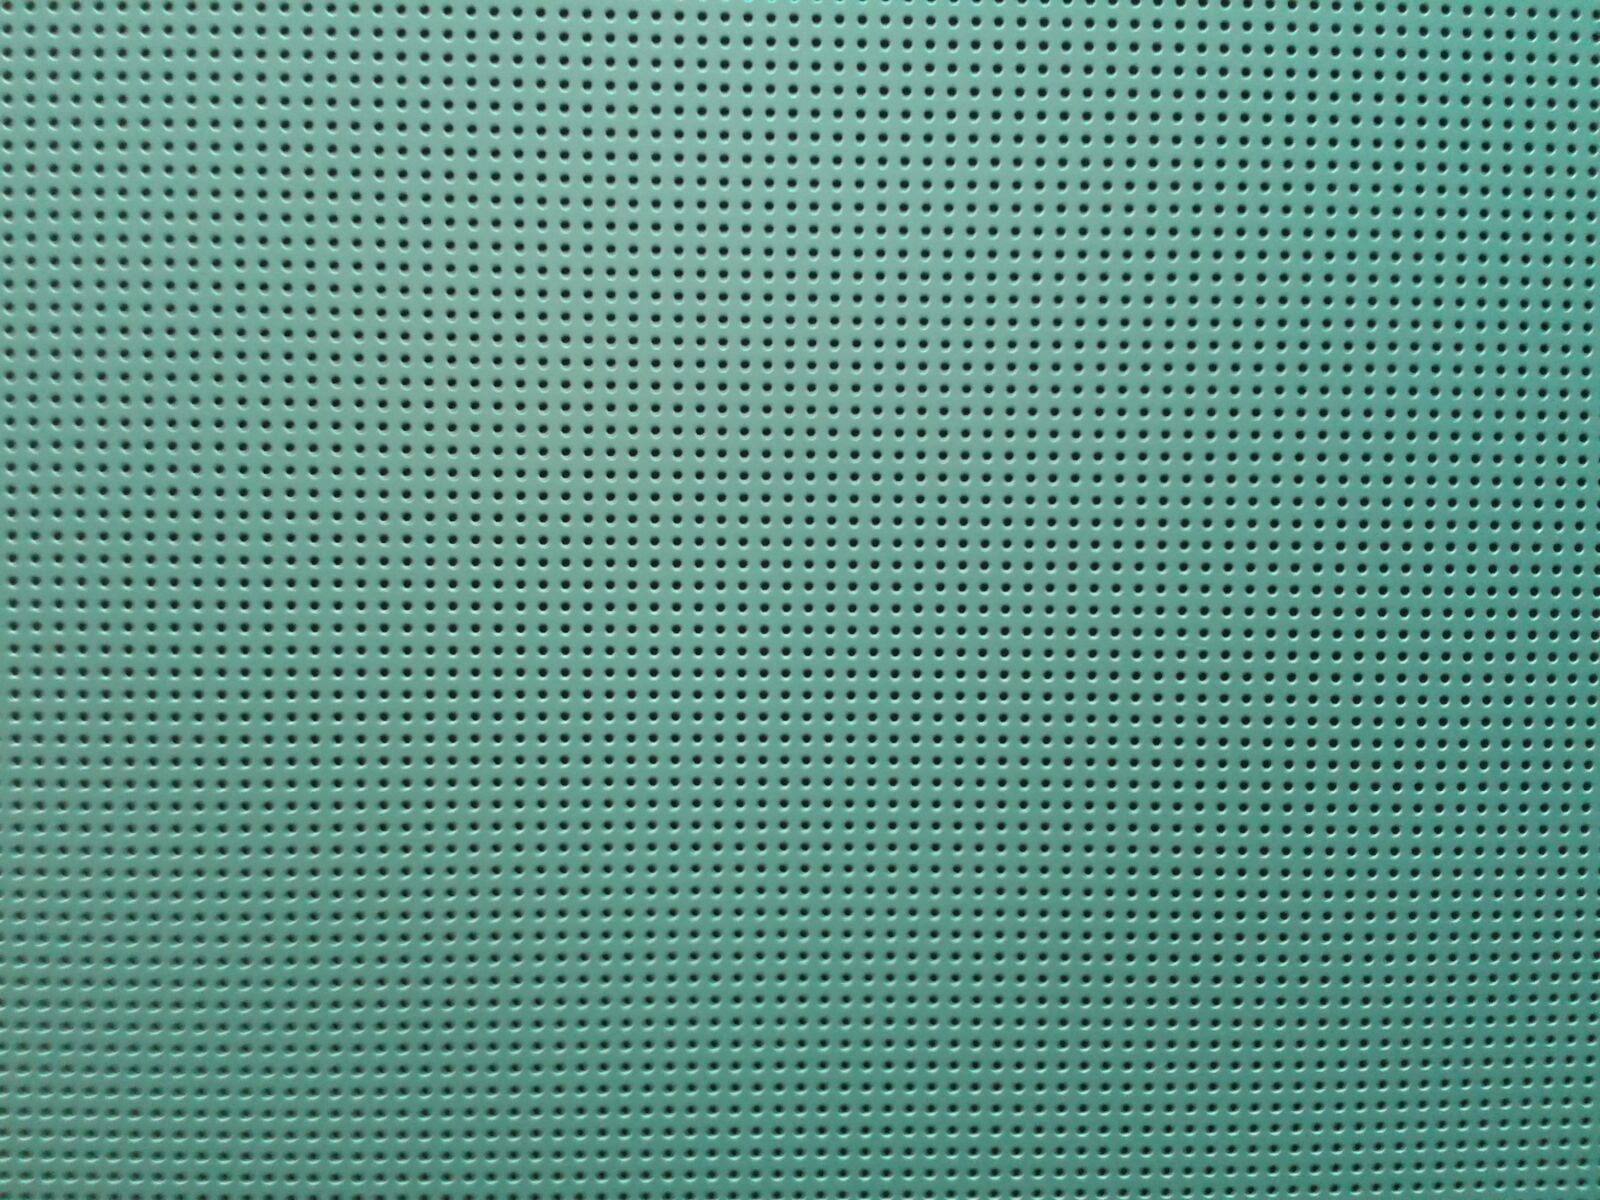 Samsung Galaxy S3 Mini sample photo. Structure, surface, pattern photography